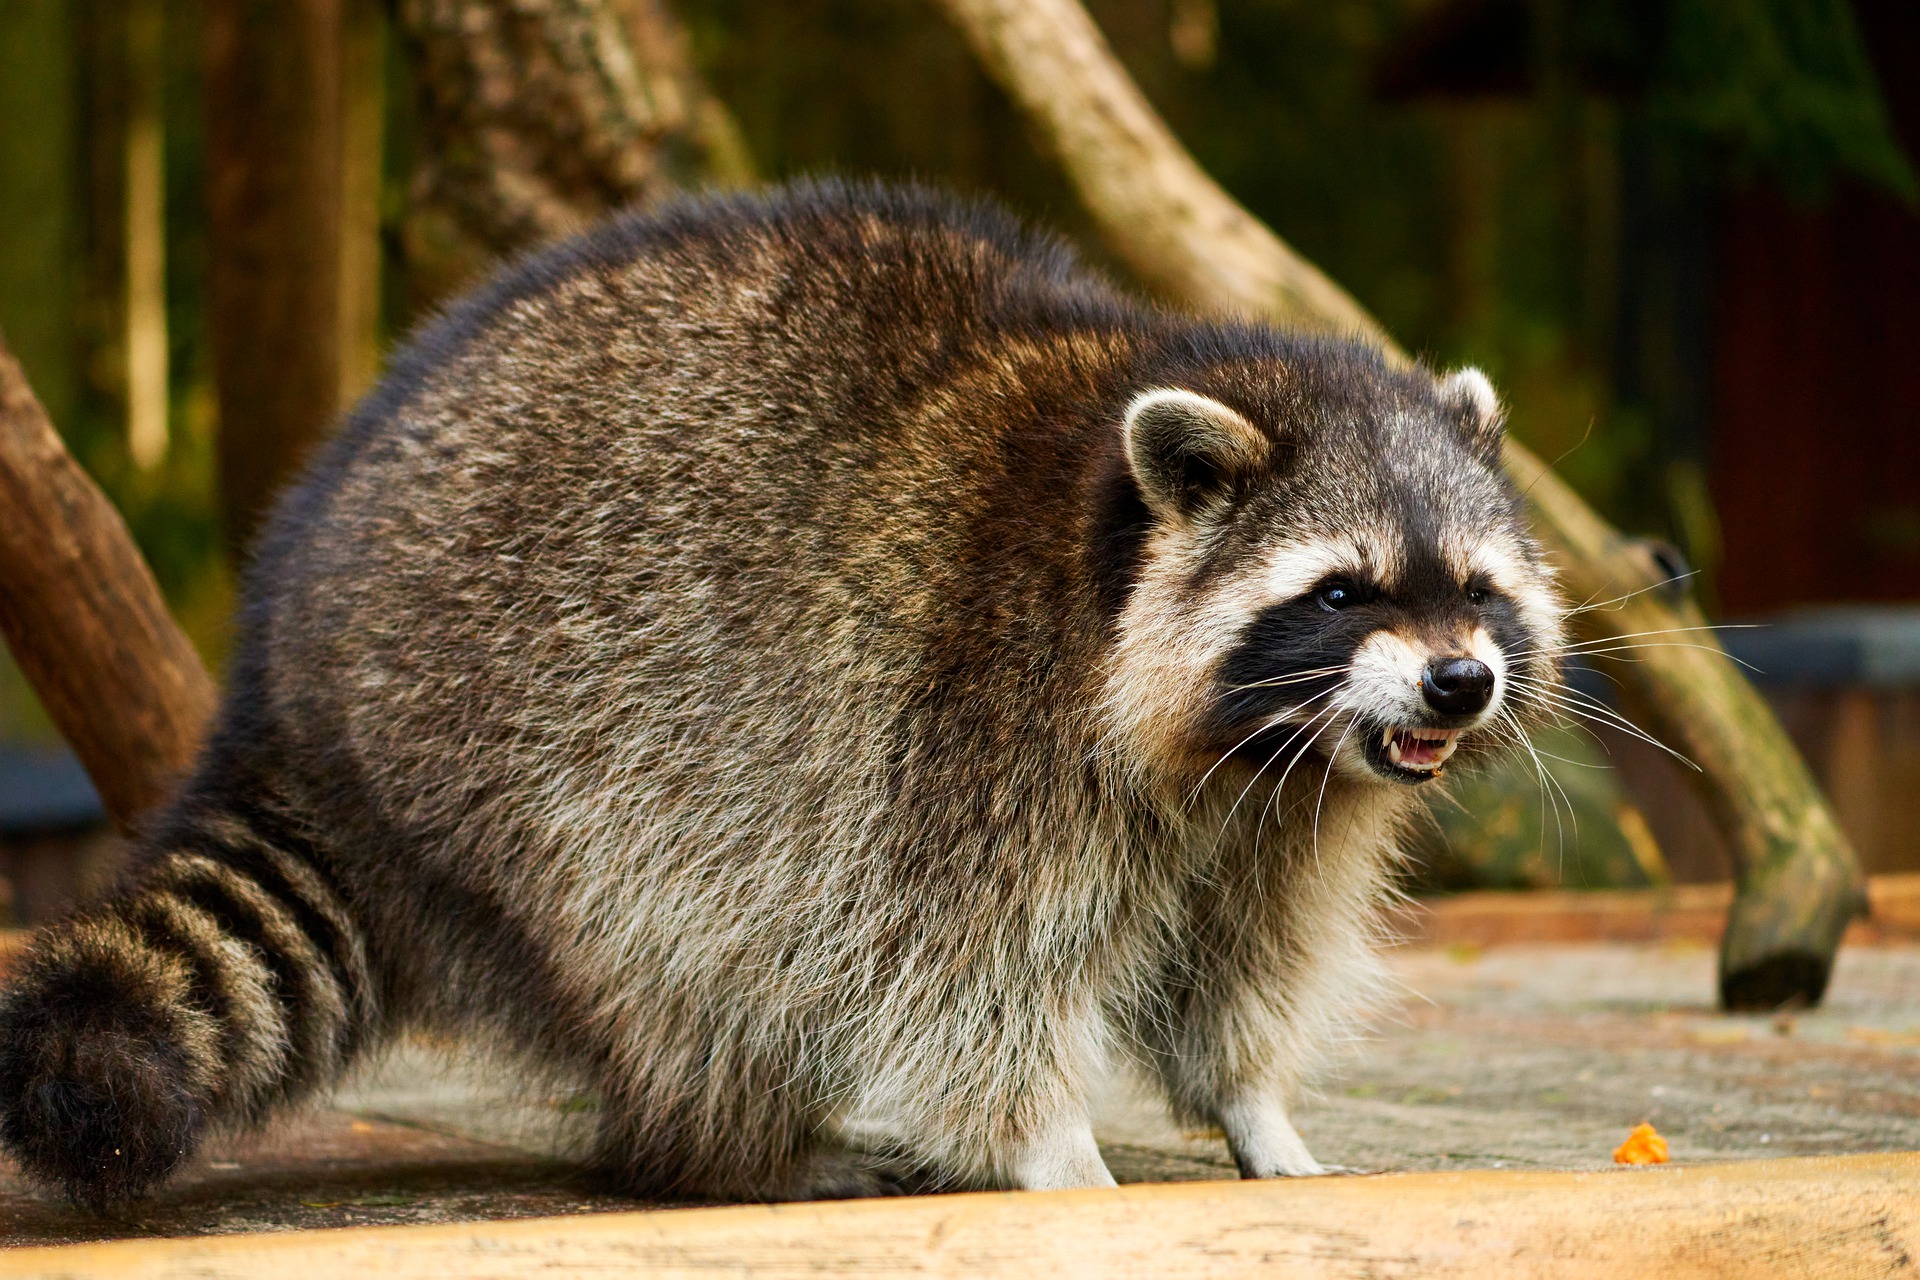 Raccoon with its mouth slightly open